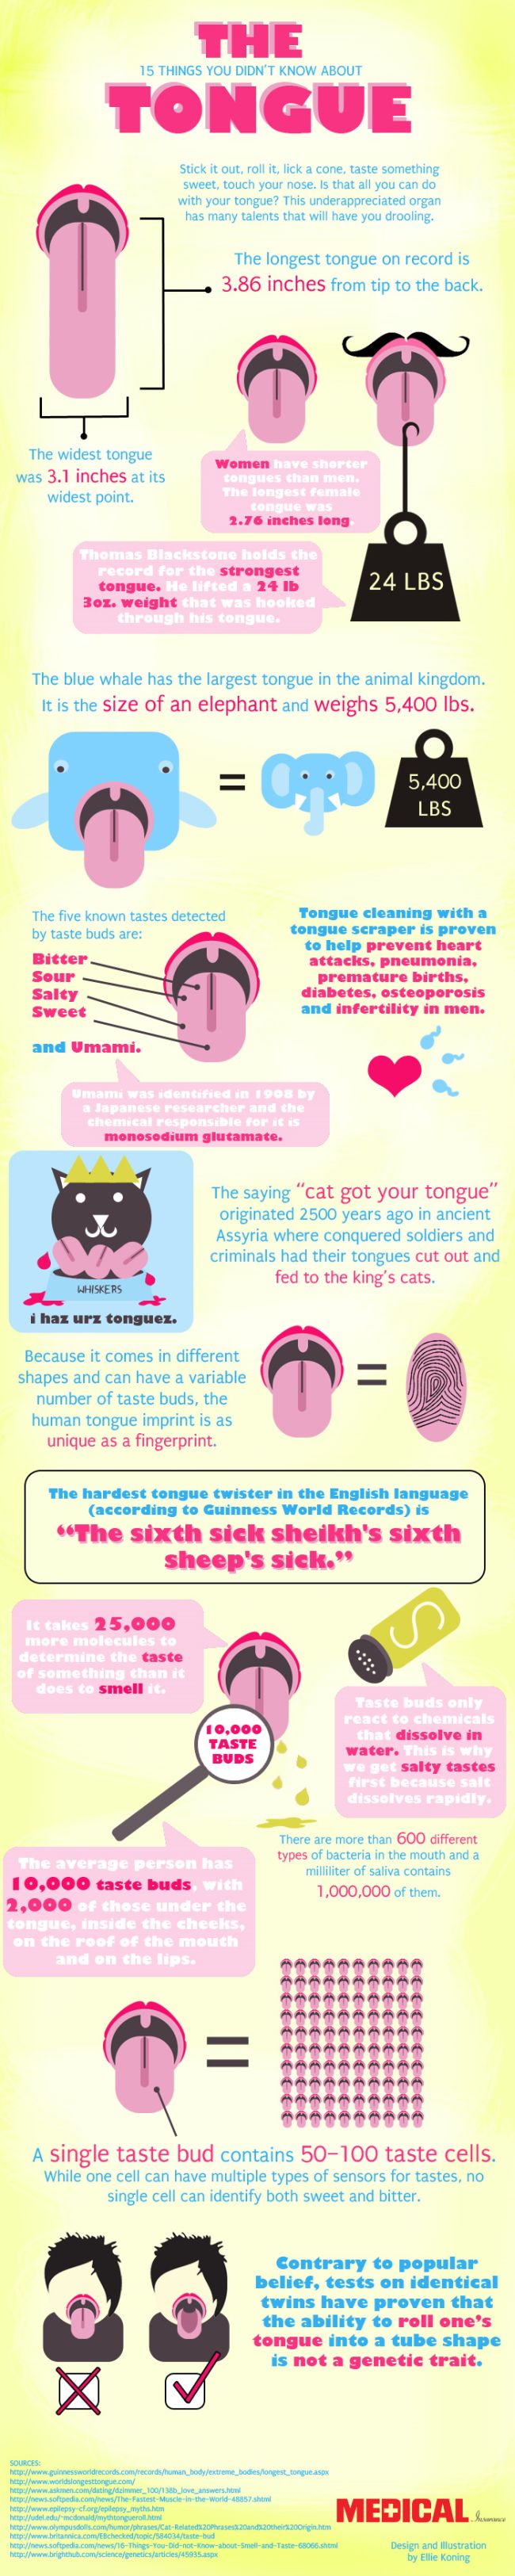 15 Facts about the human tongue